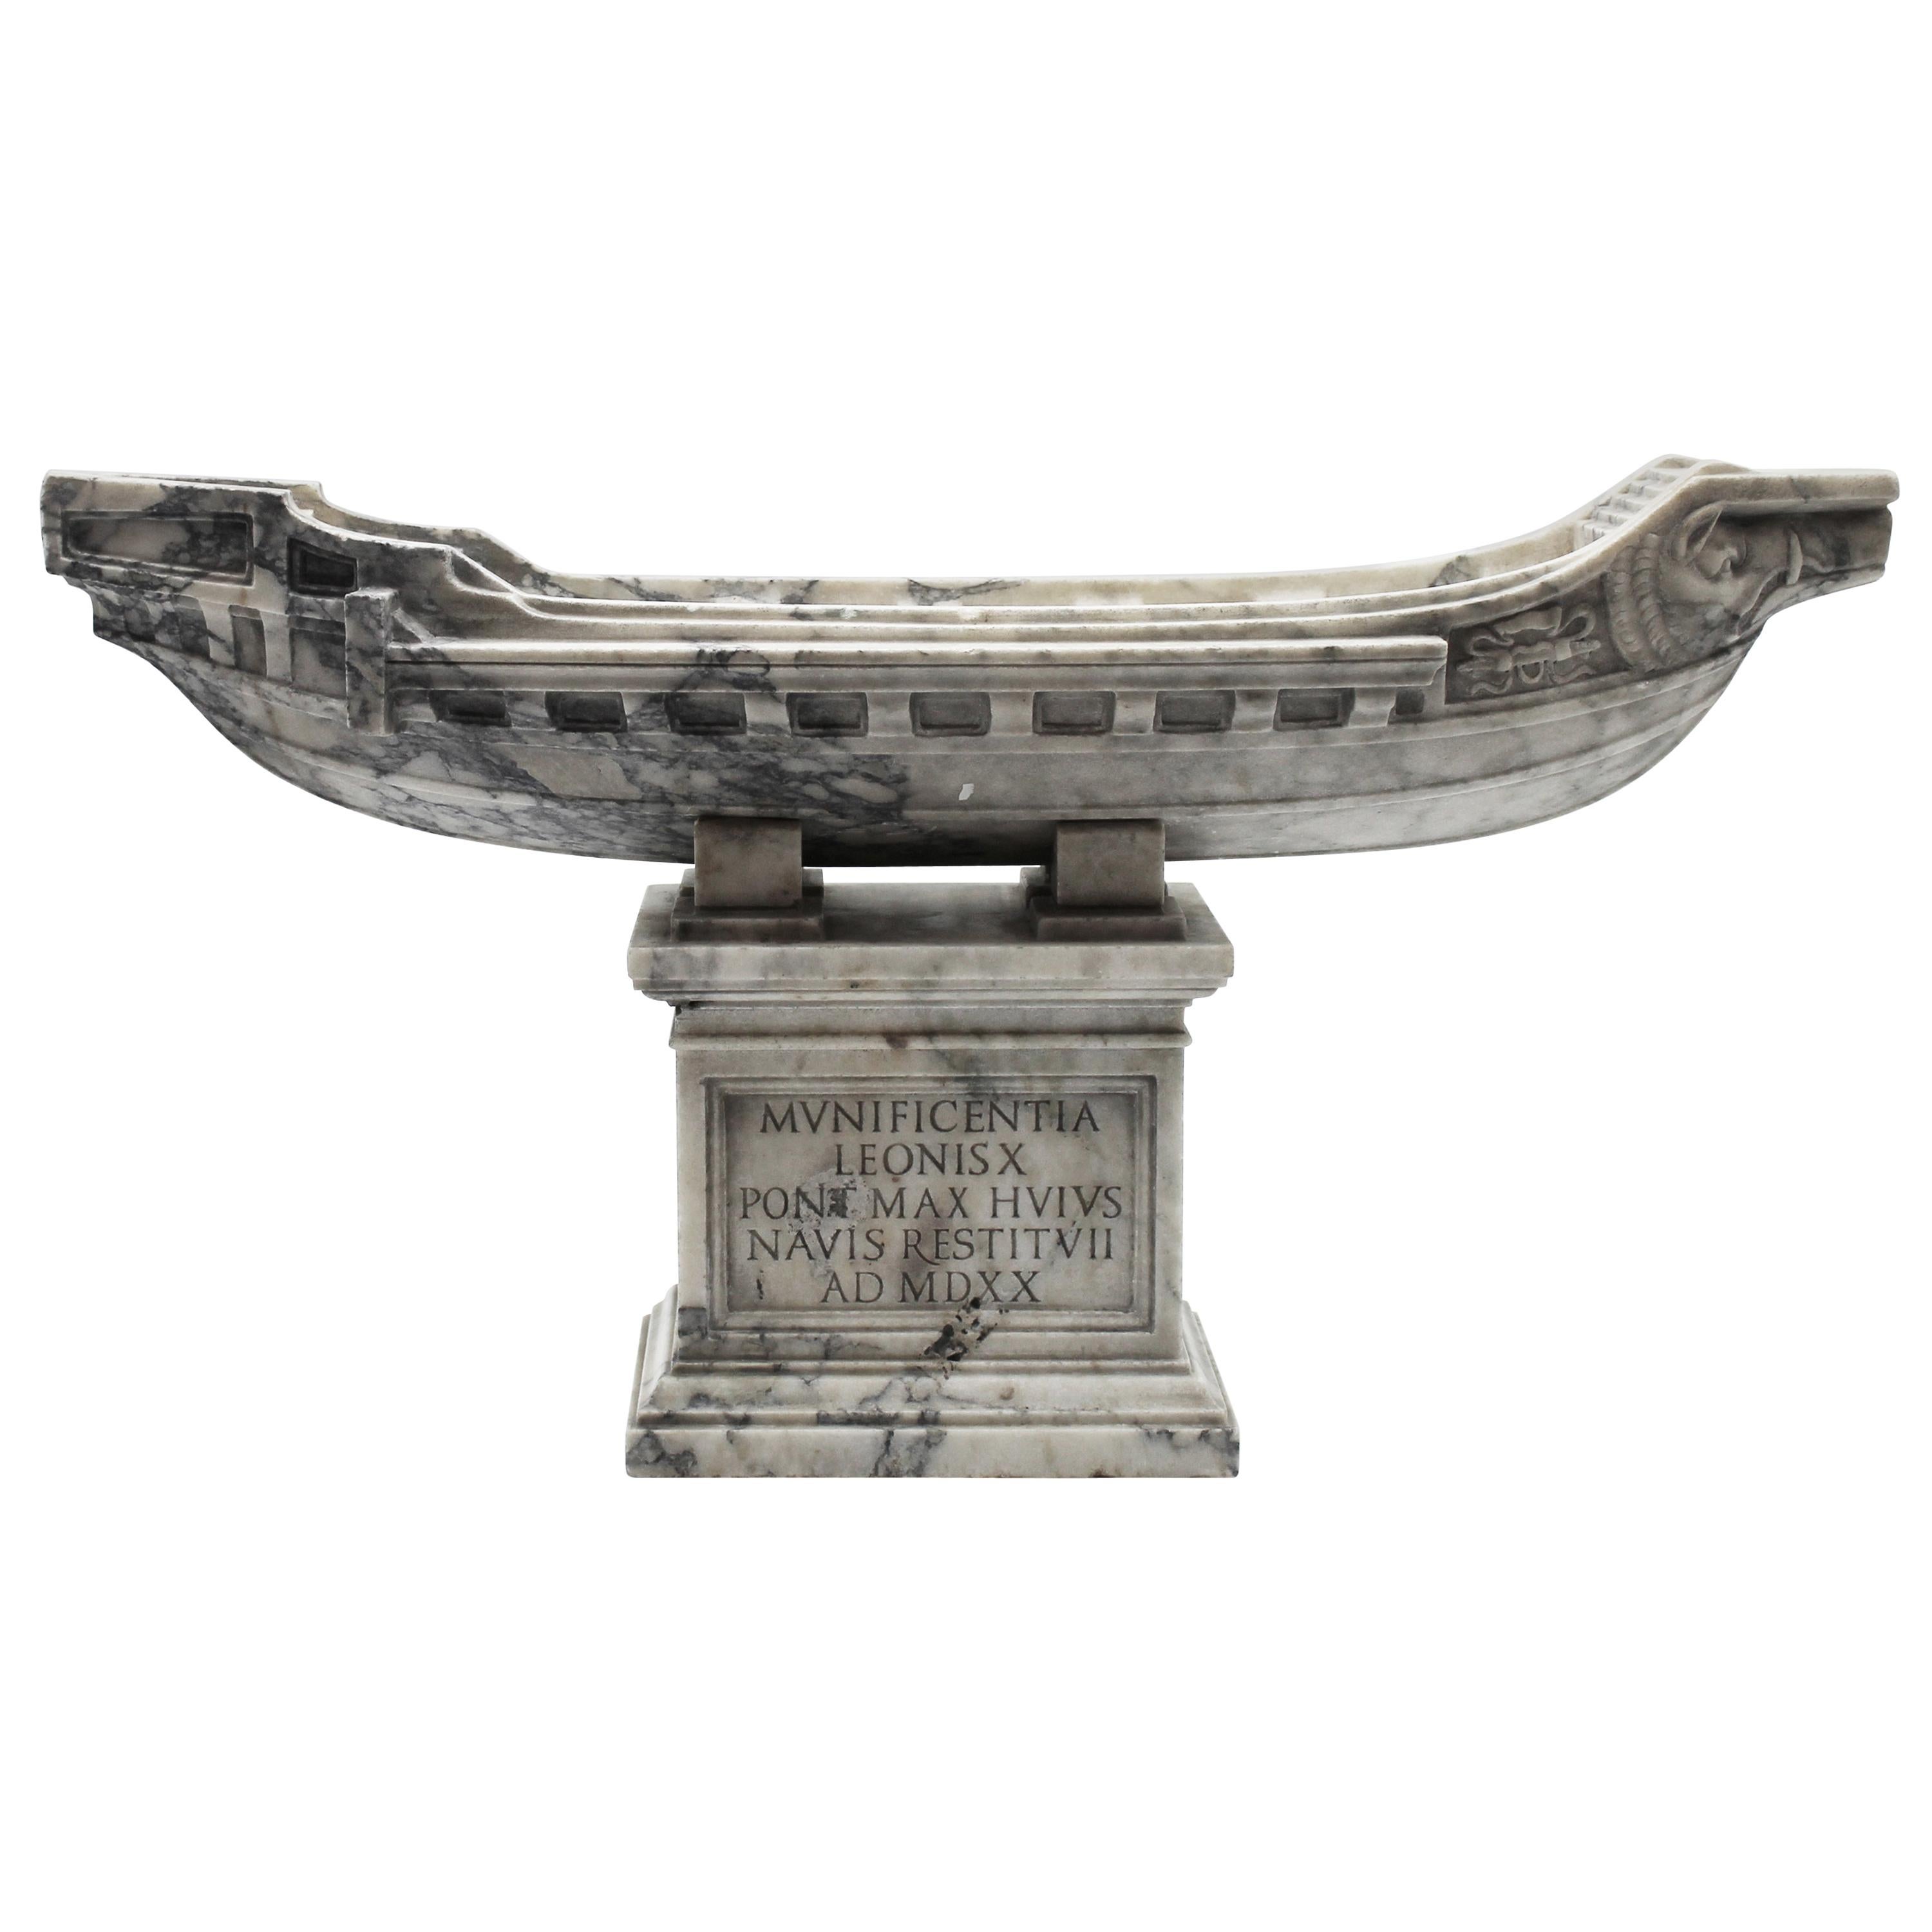 20th Century Italian White Marble Statuary Sculpture of Boat by Giancarlo Pace